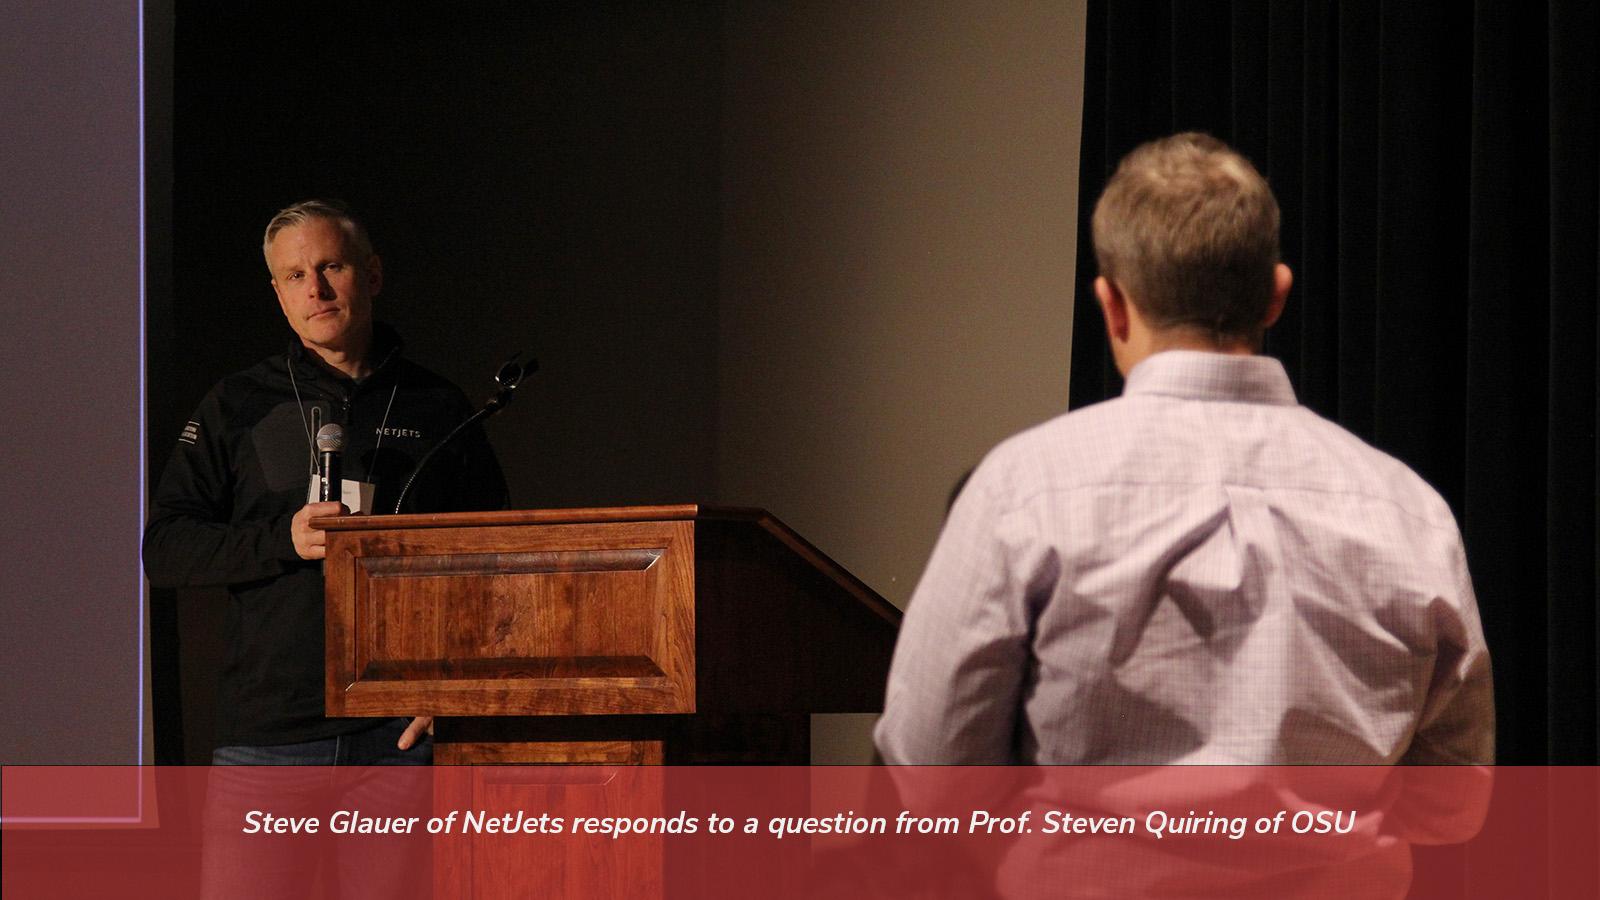 Steve Glauer of NetJets responds to a question from Prof. Steven Quiring of OSU